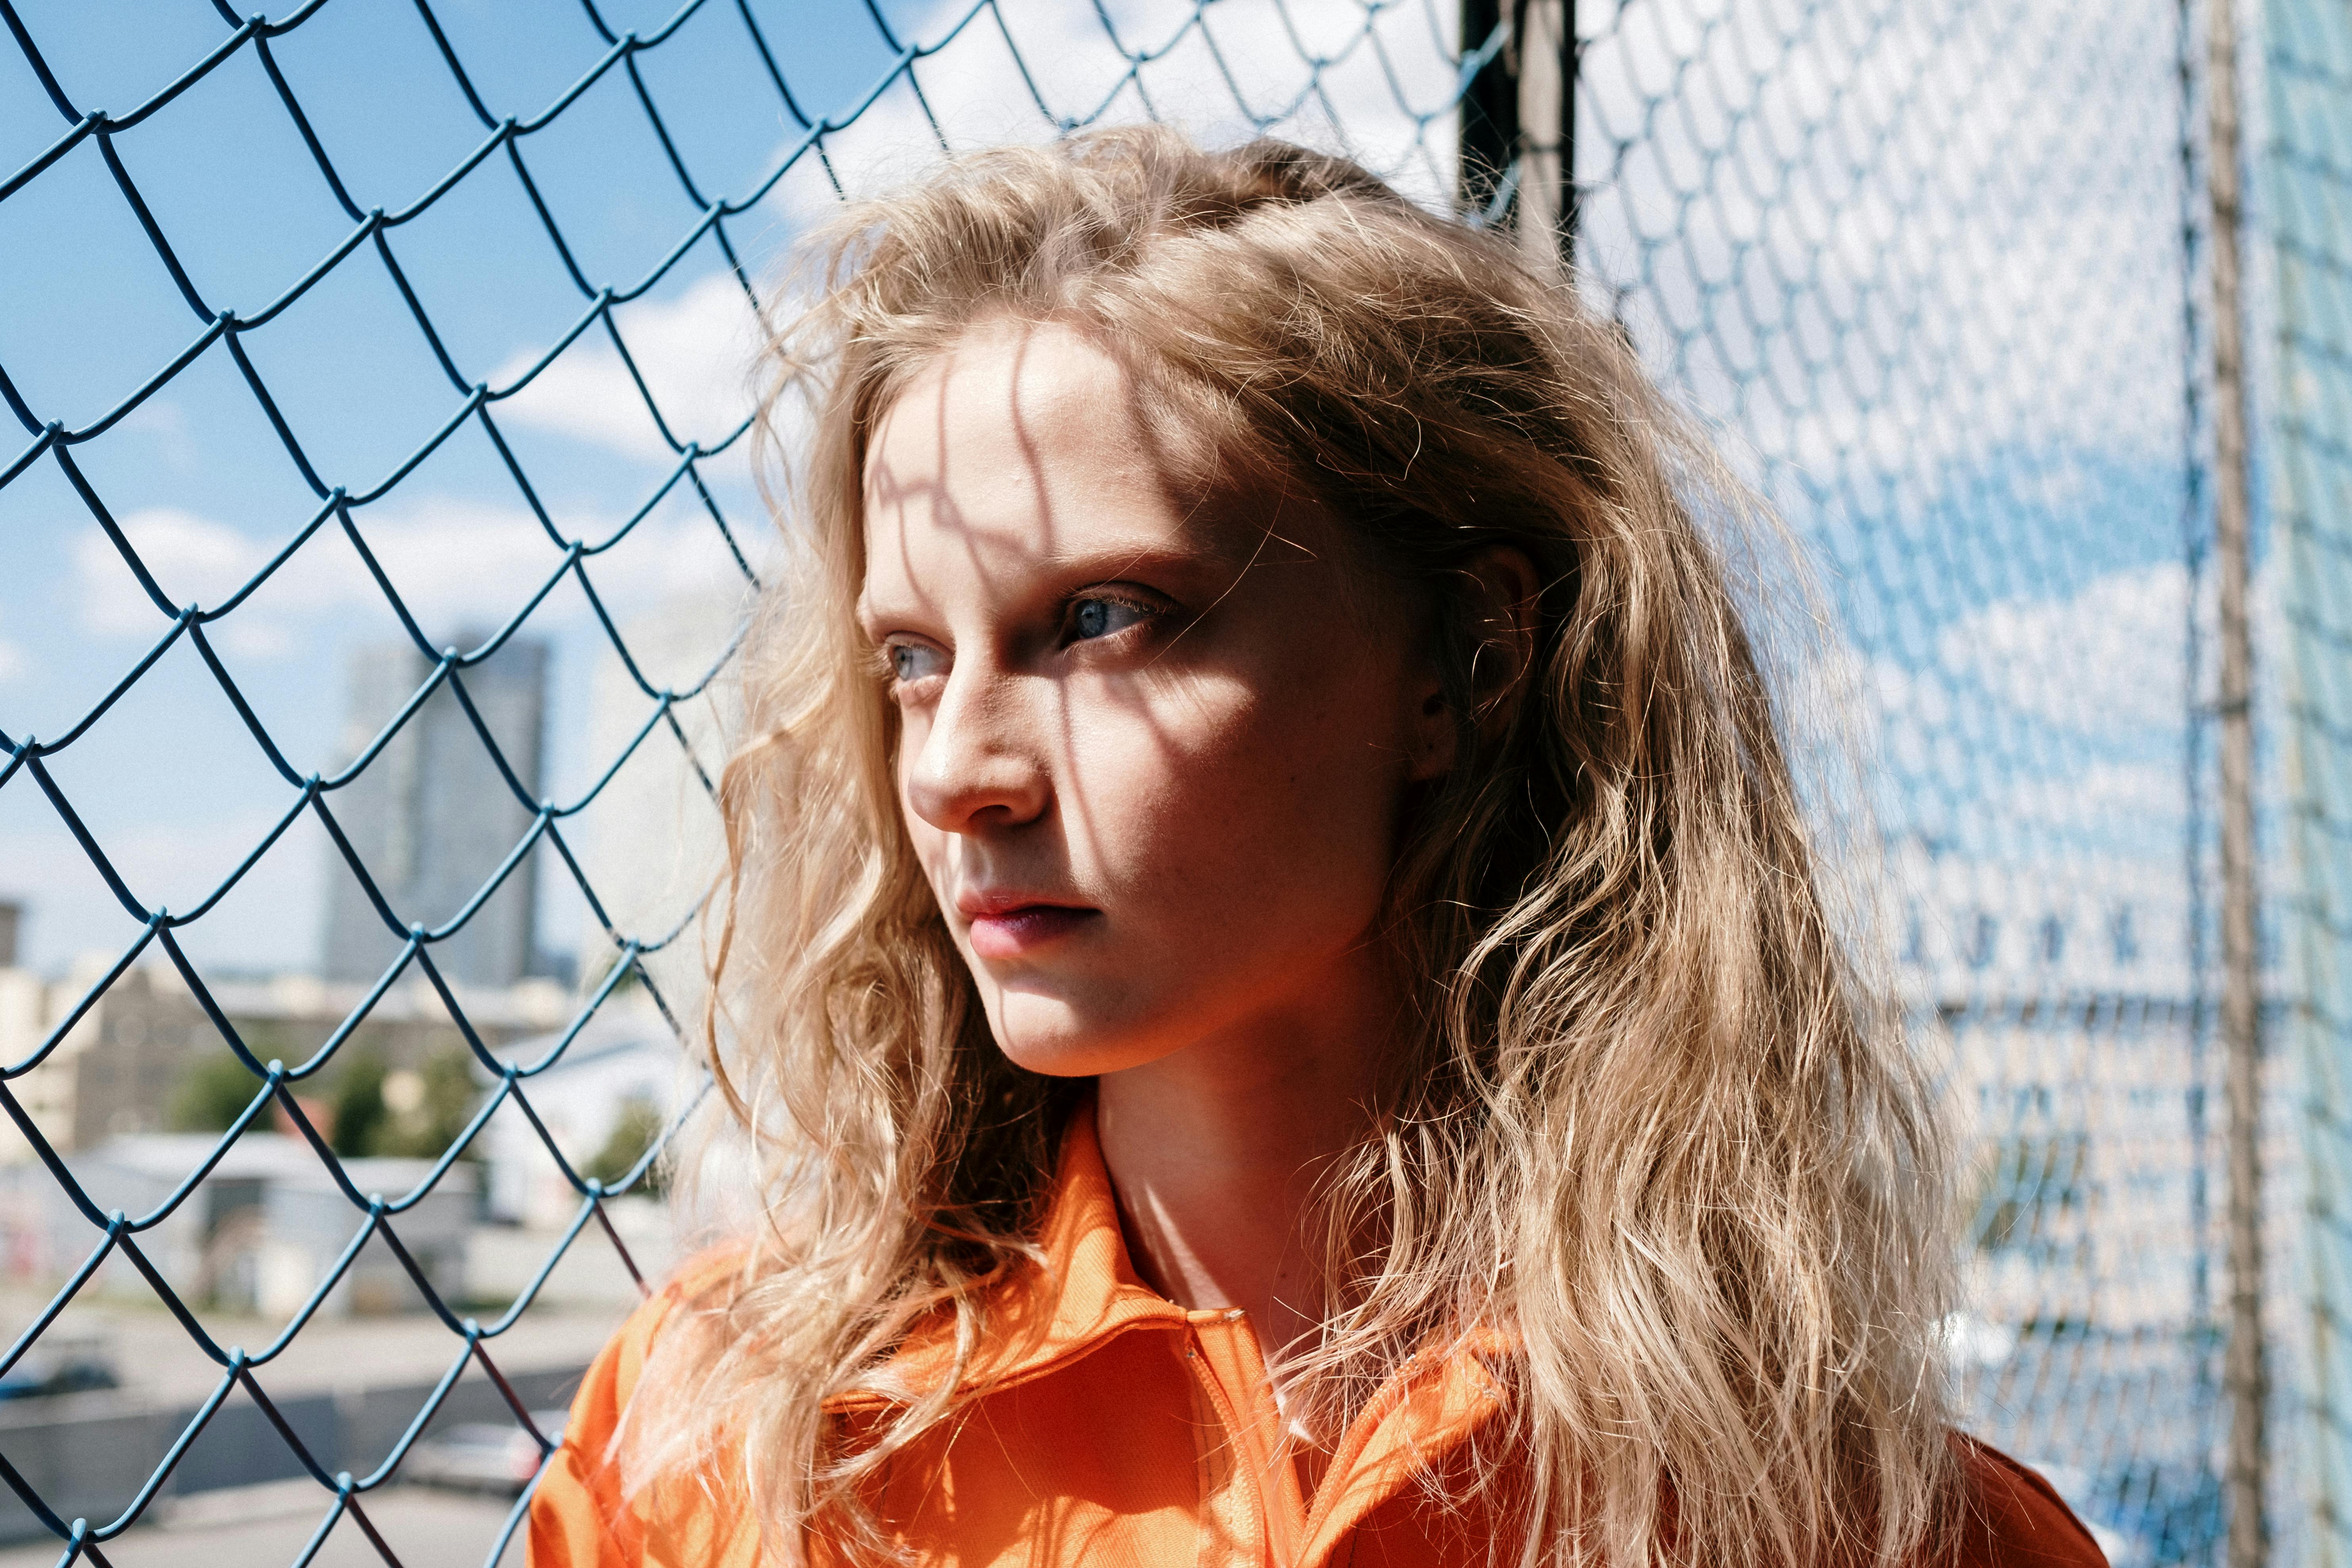 a woman in orange shirt near the chain link fence